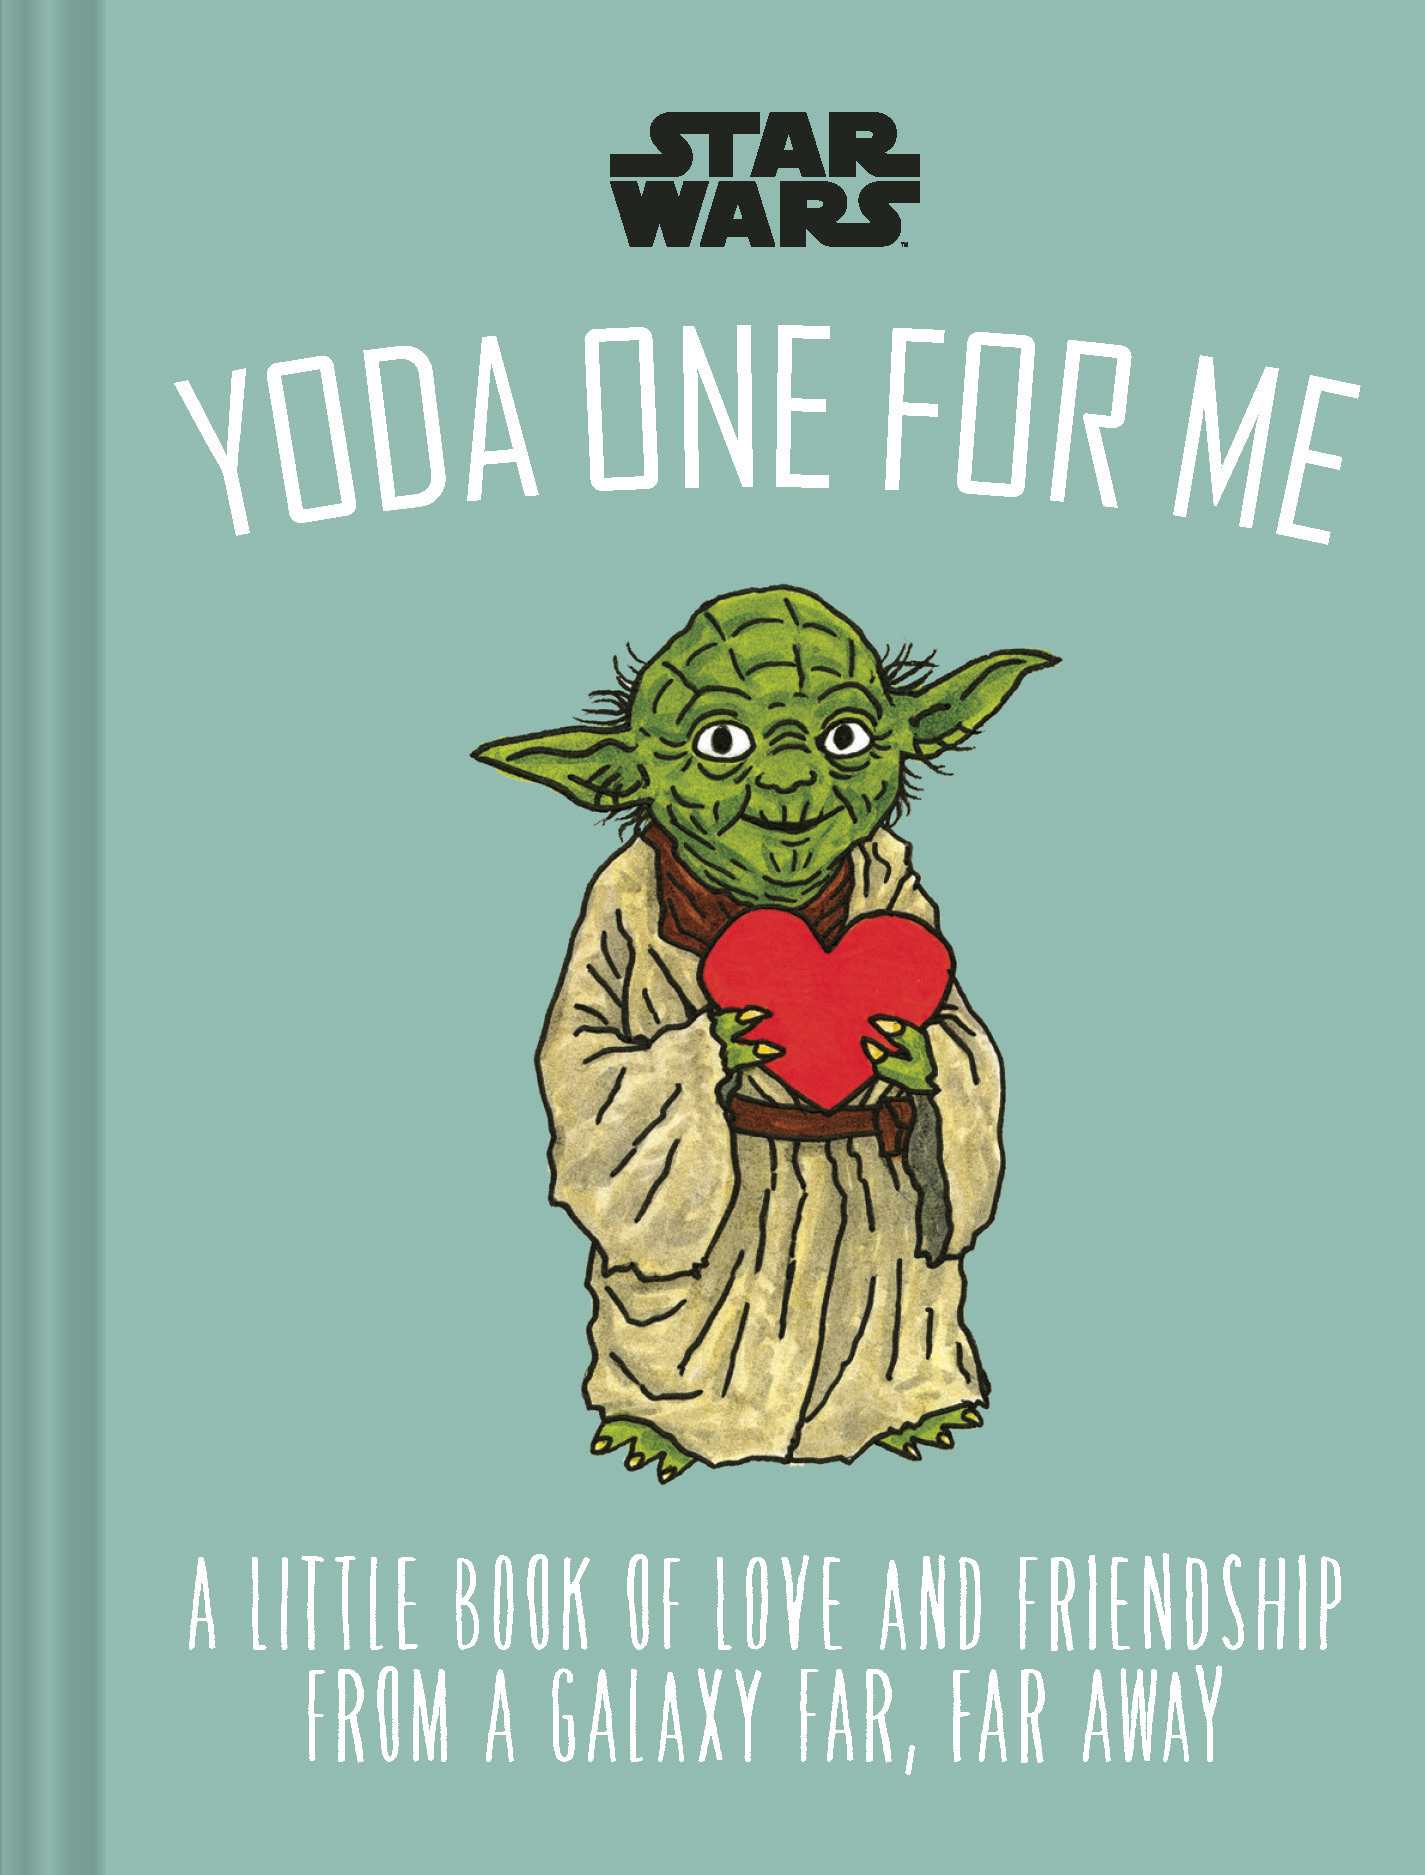 Star Wars: Yoda One For Me Hardcover